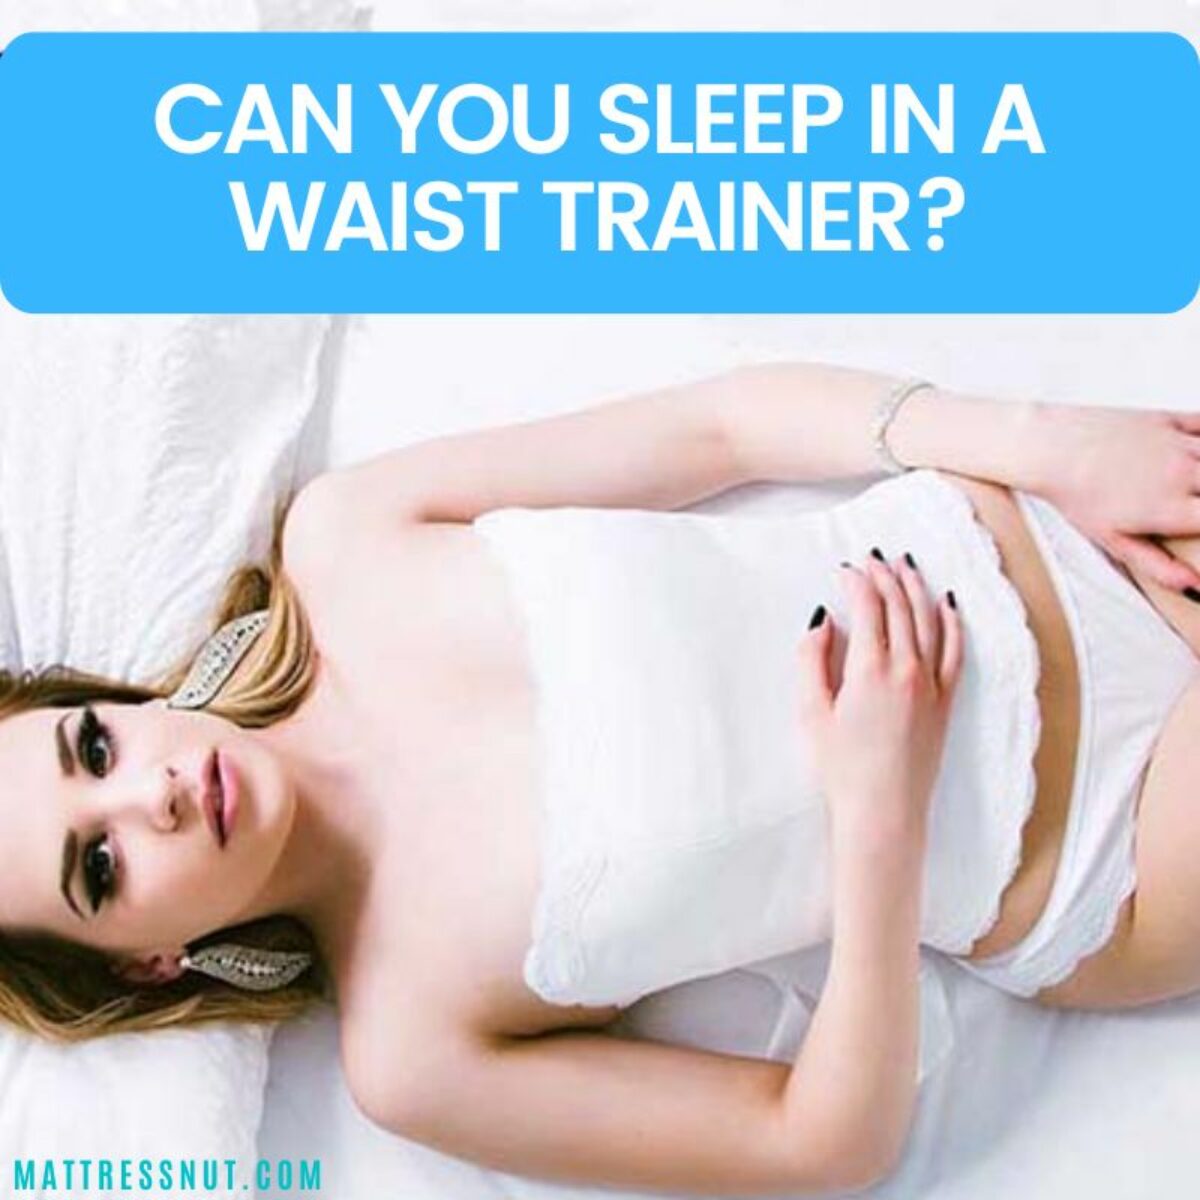 Can You Sleep in a Waist Trainer?